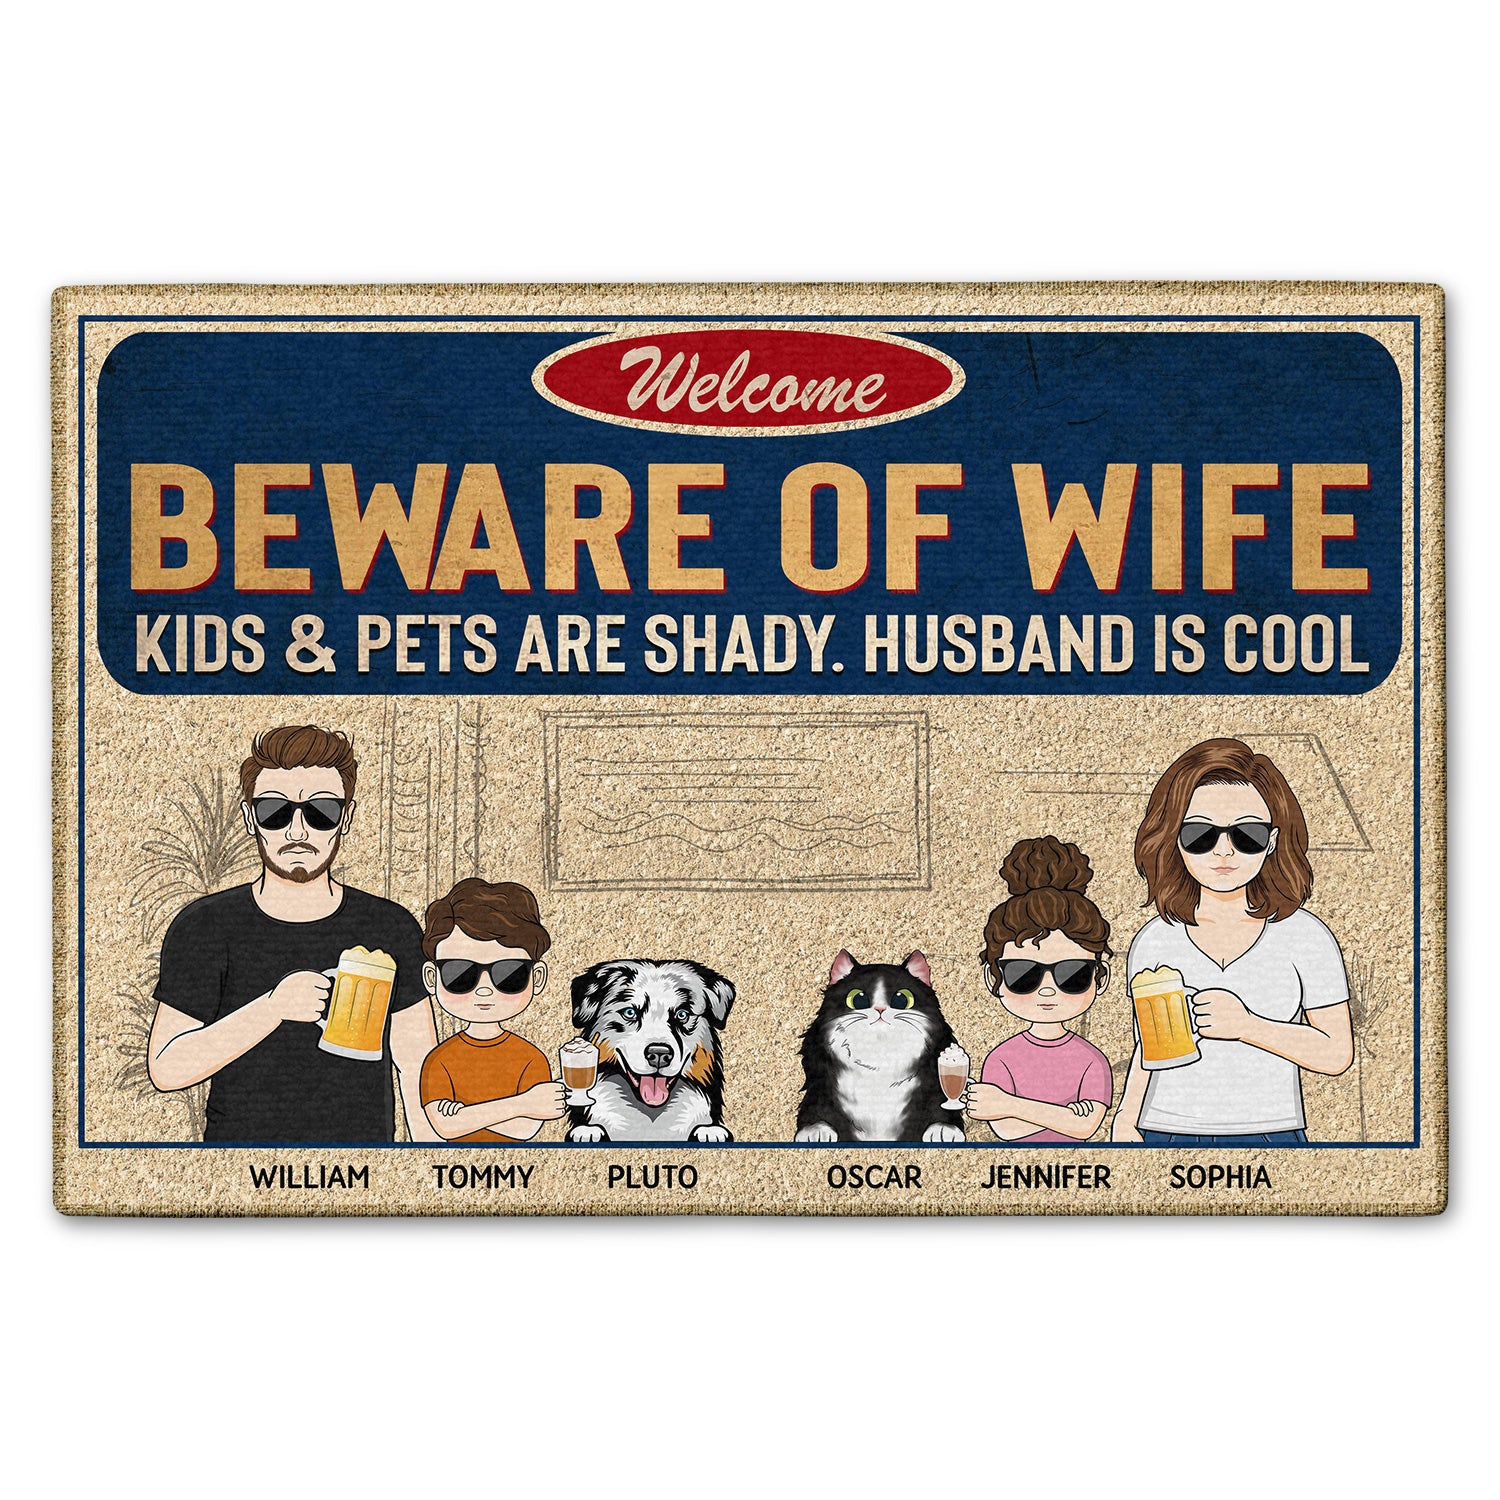 Beware Of Wife Kids & Pets Are Shady Husband Is Cool Couple Husband Wife - Home Decor, Funny, Anniversary Gift For Family, Dog Lovers, Cat Lovers - Personalized Custom Doormat